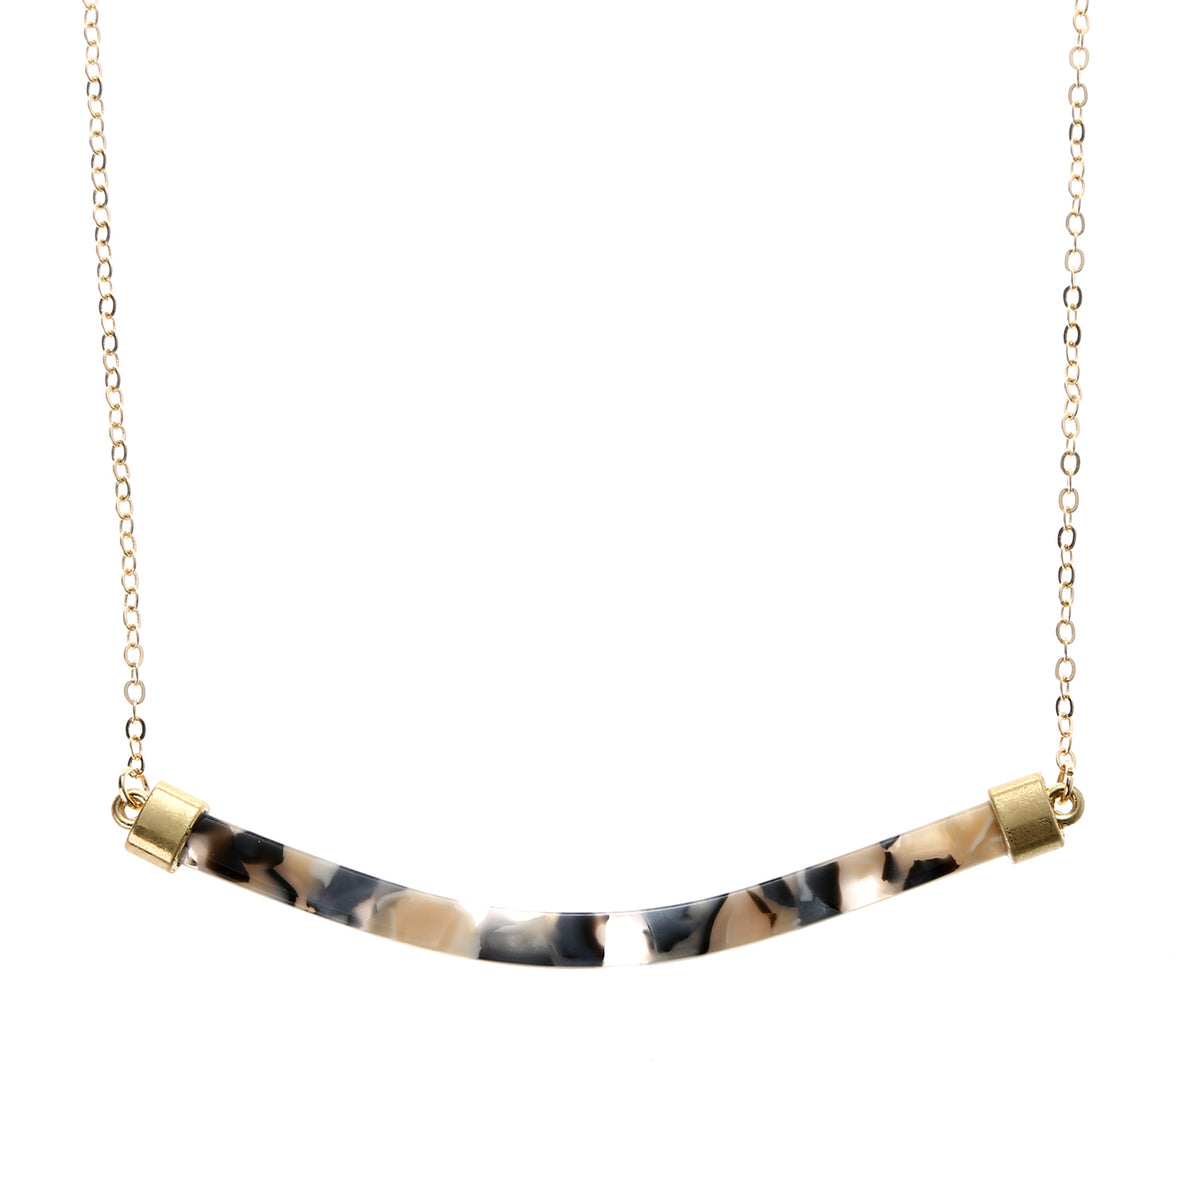 14" Gold Chain, Curved Resin Bar, 3" Ext.